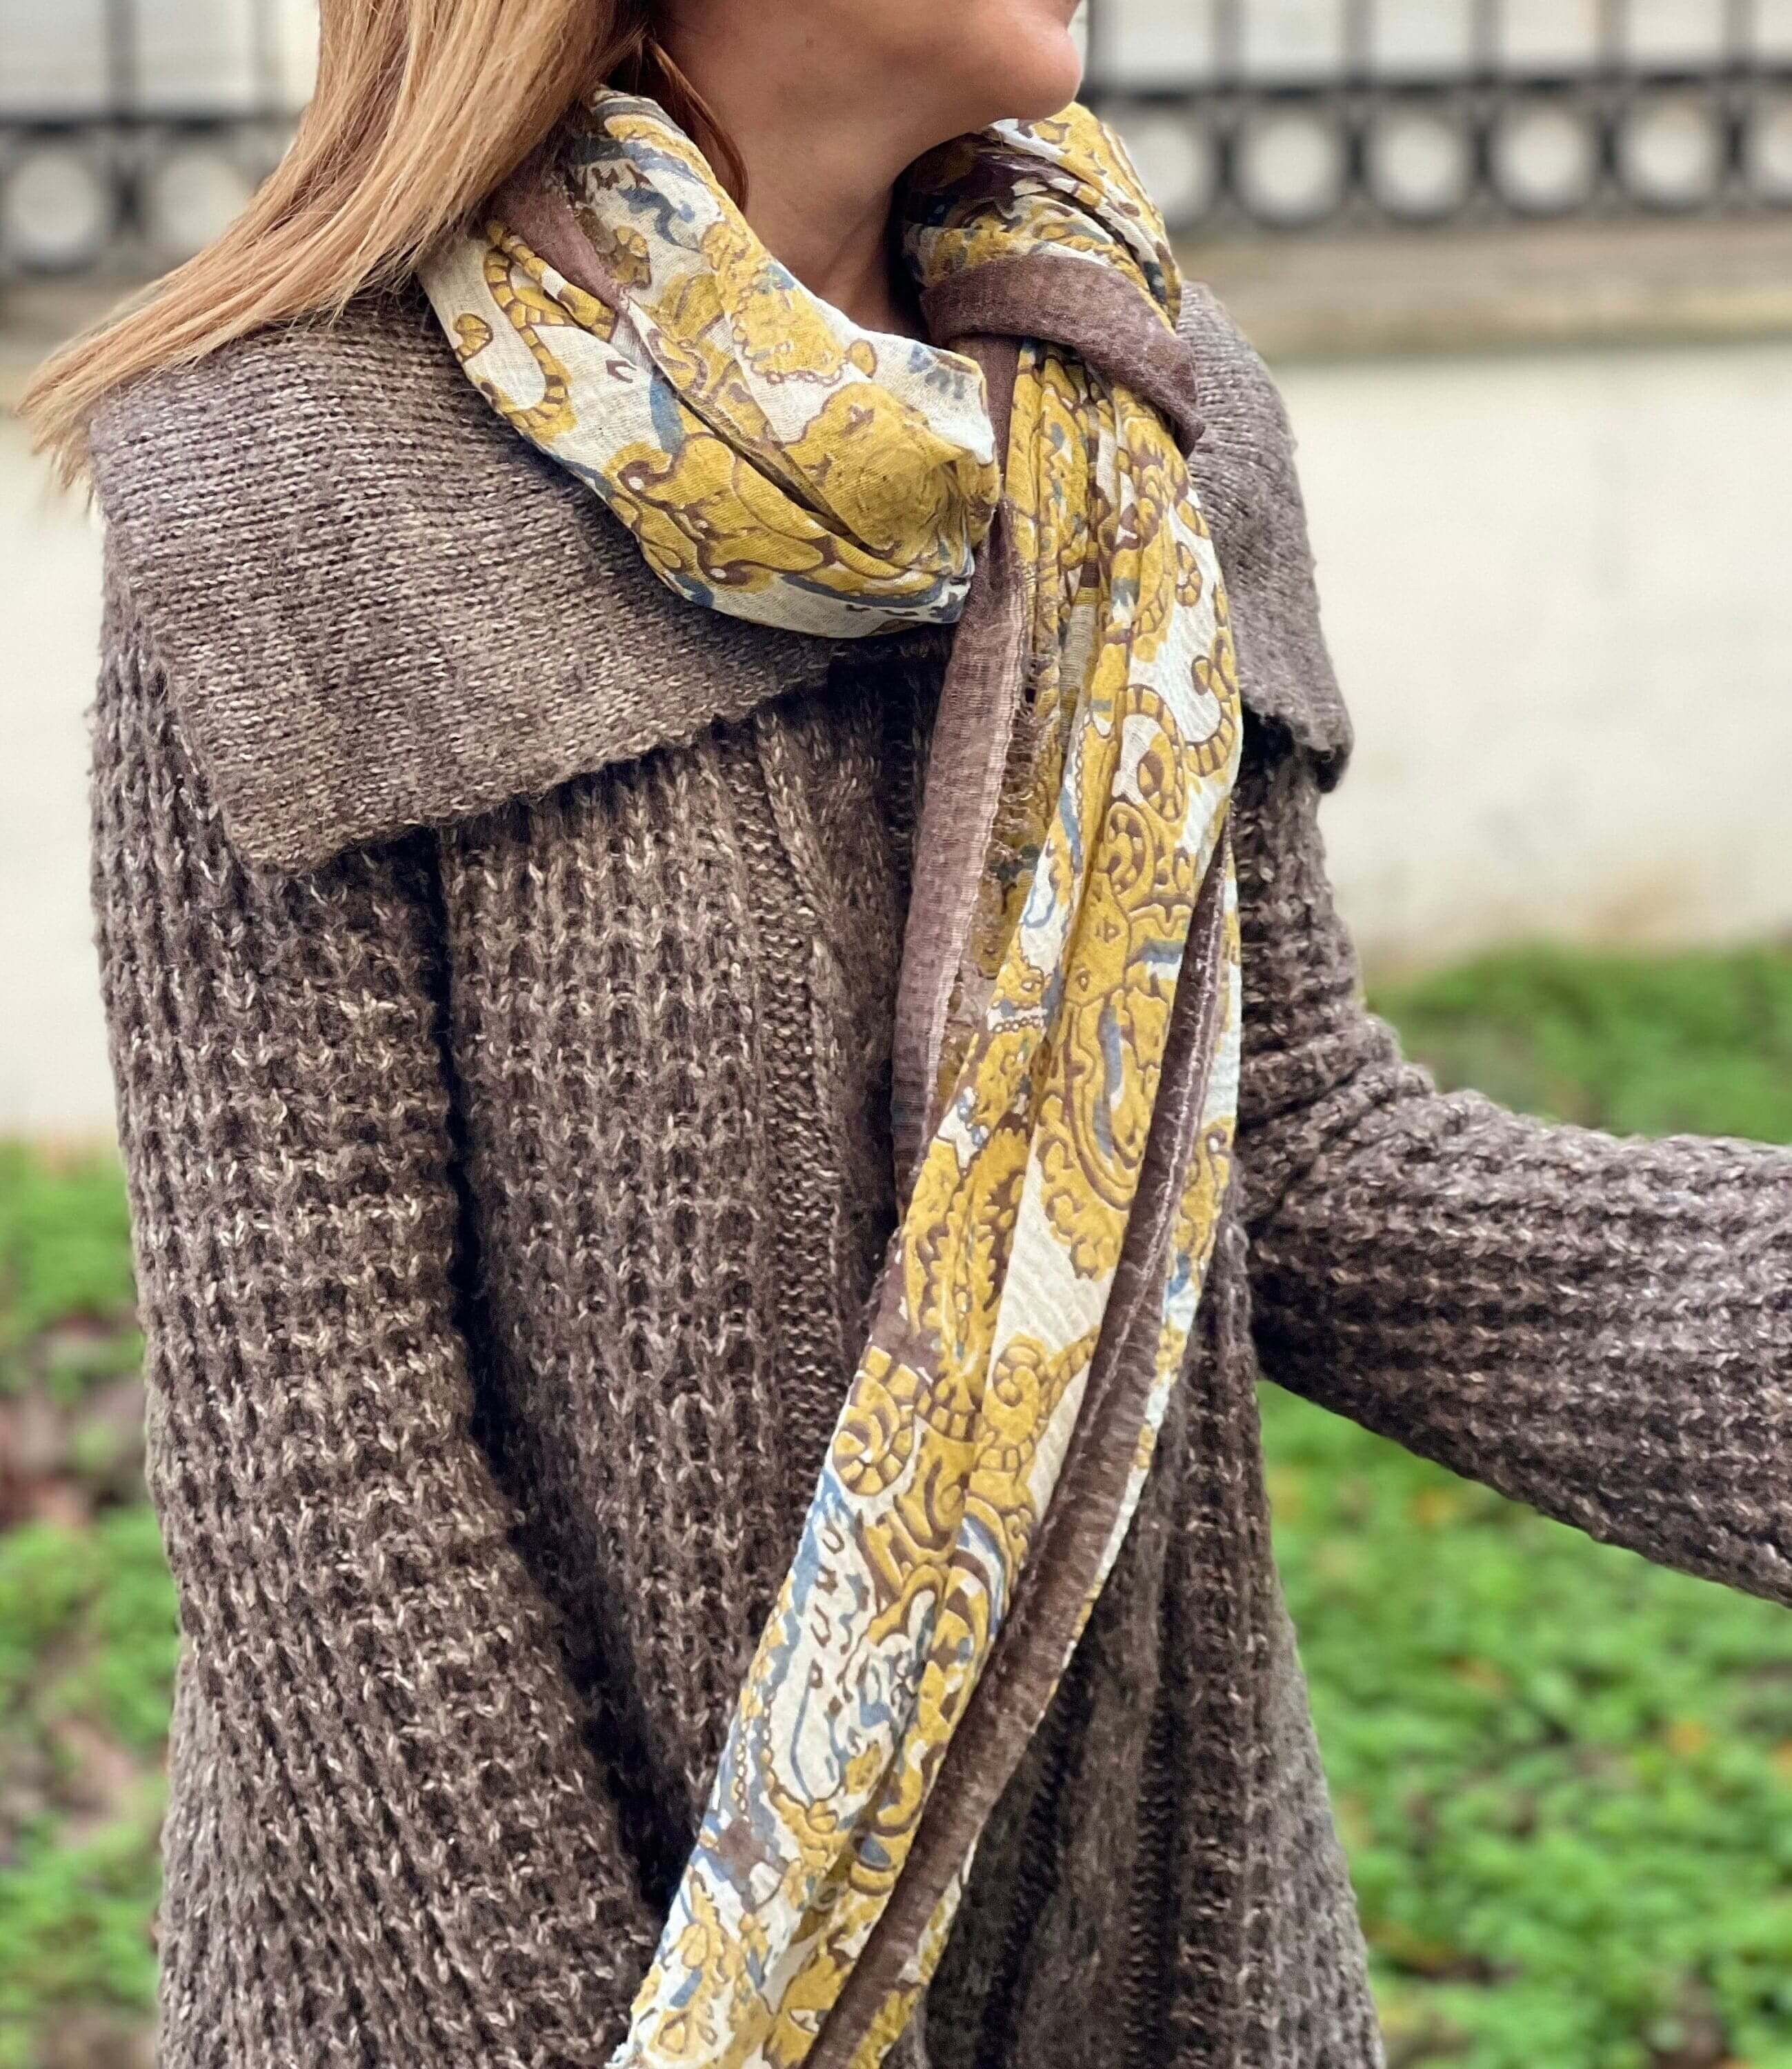 If you are in the market for a designer scarf that will make a statement, then our printed scarf is just the thing for you! Featuring beautiful prints and intricate designs, it is sure to stand out on the crowded streets!